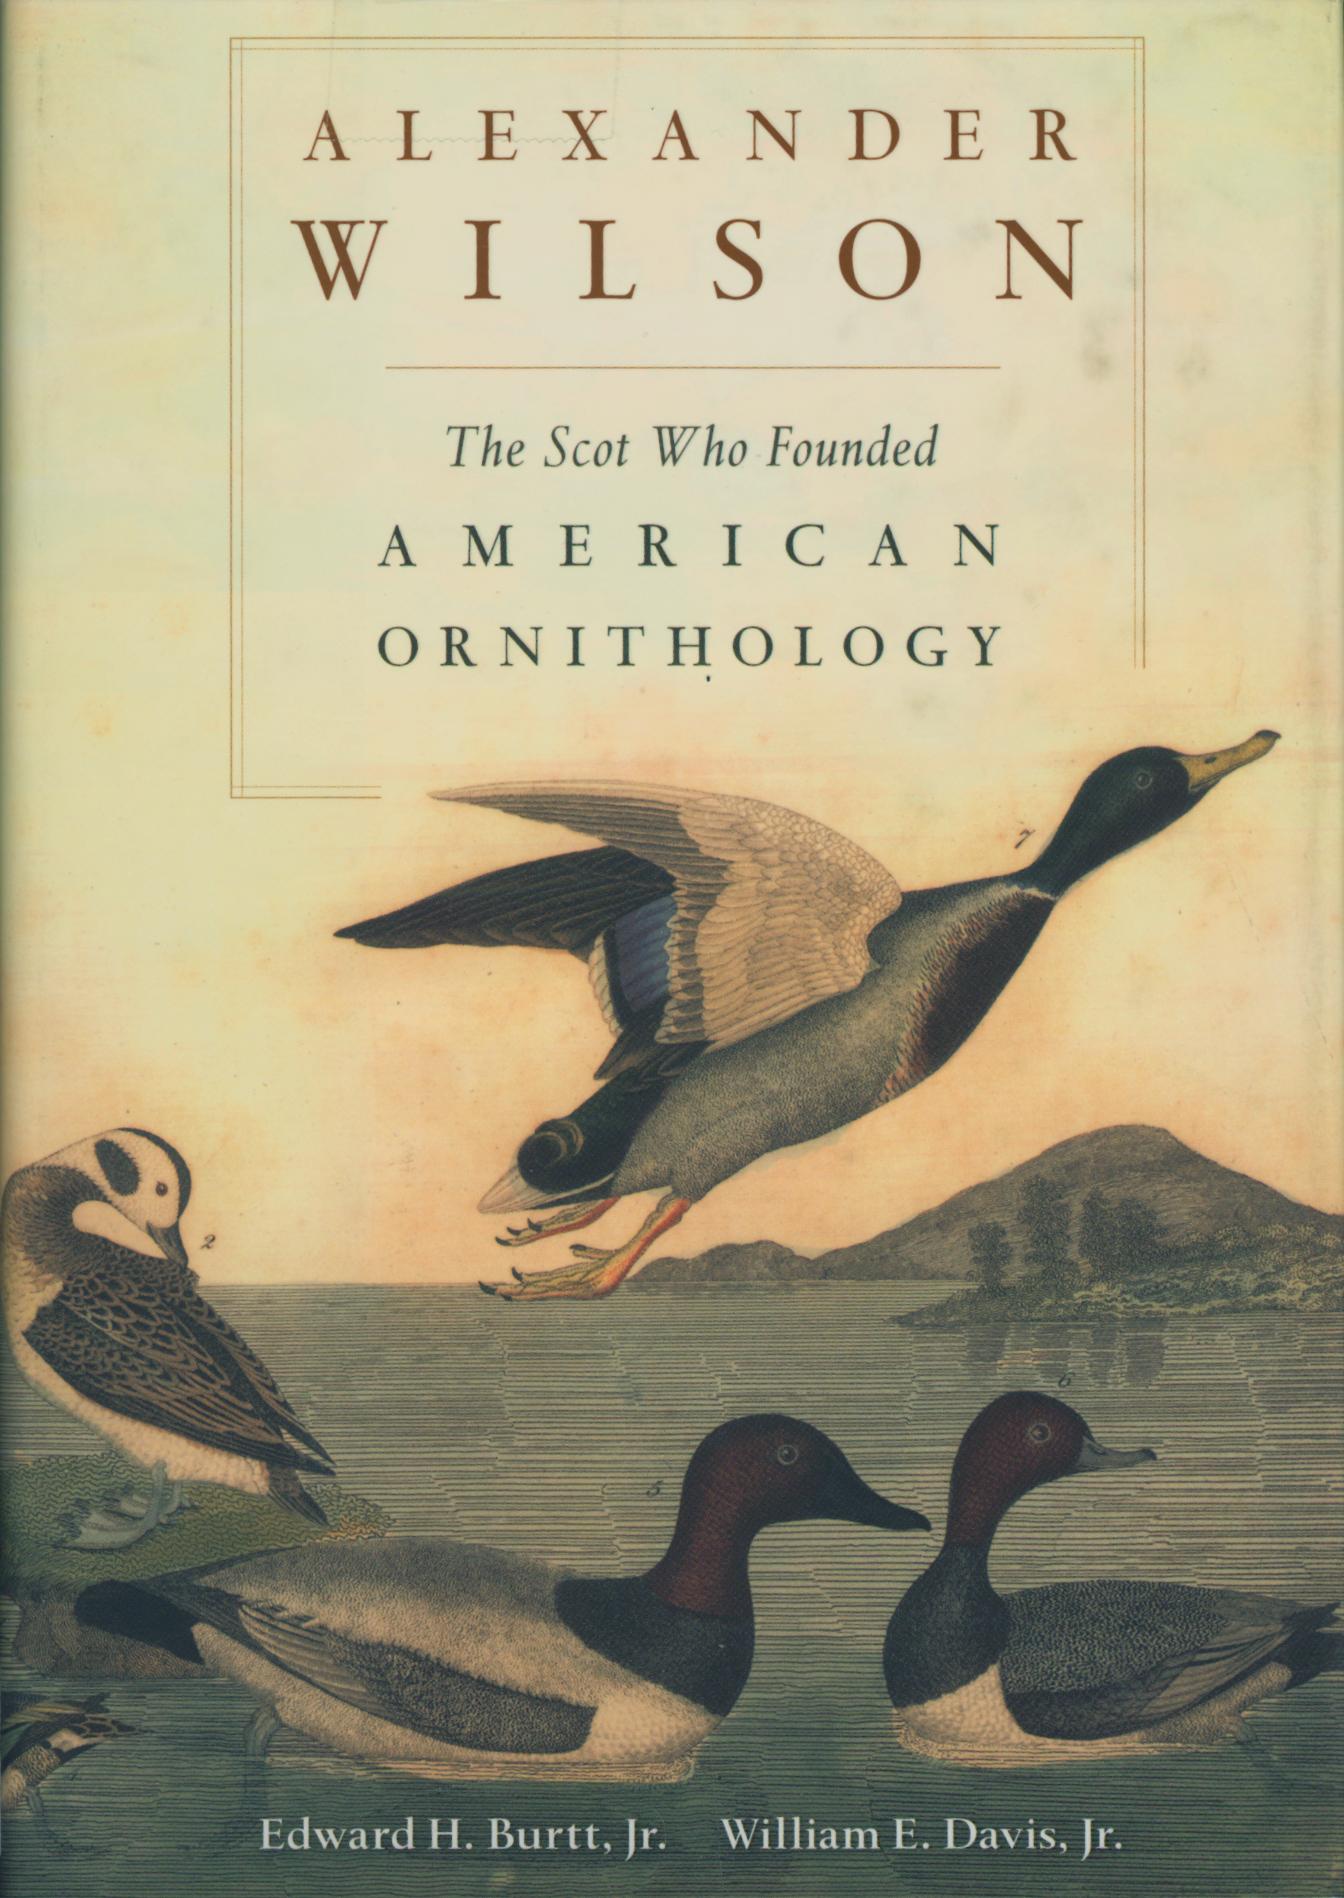 Alexander Wilson: The Scot Who Founded American Ornithology